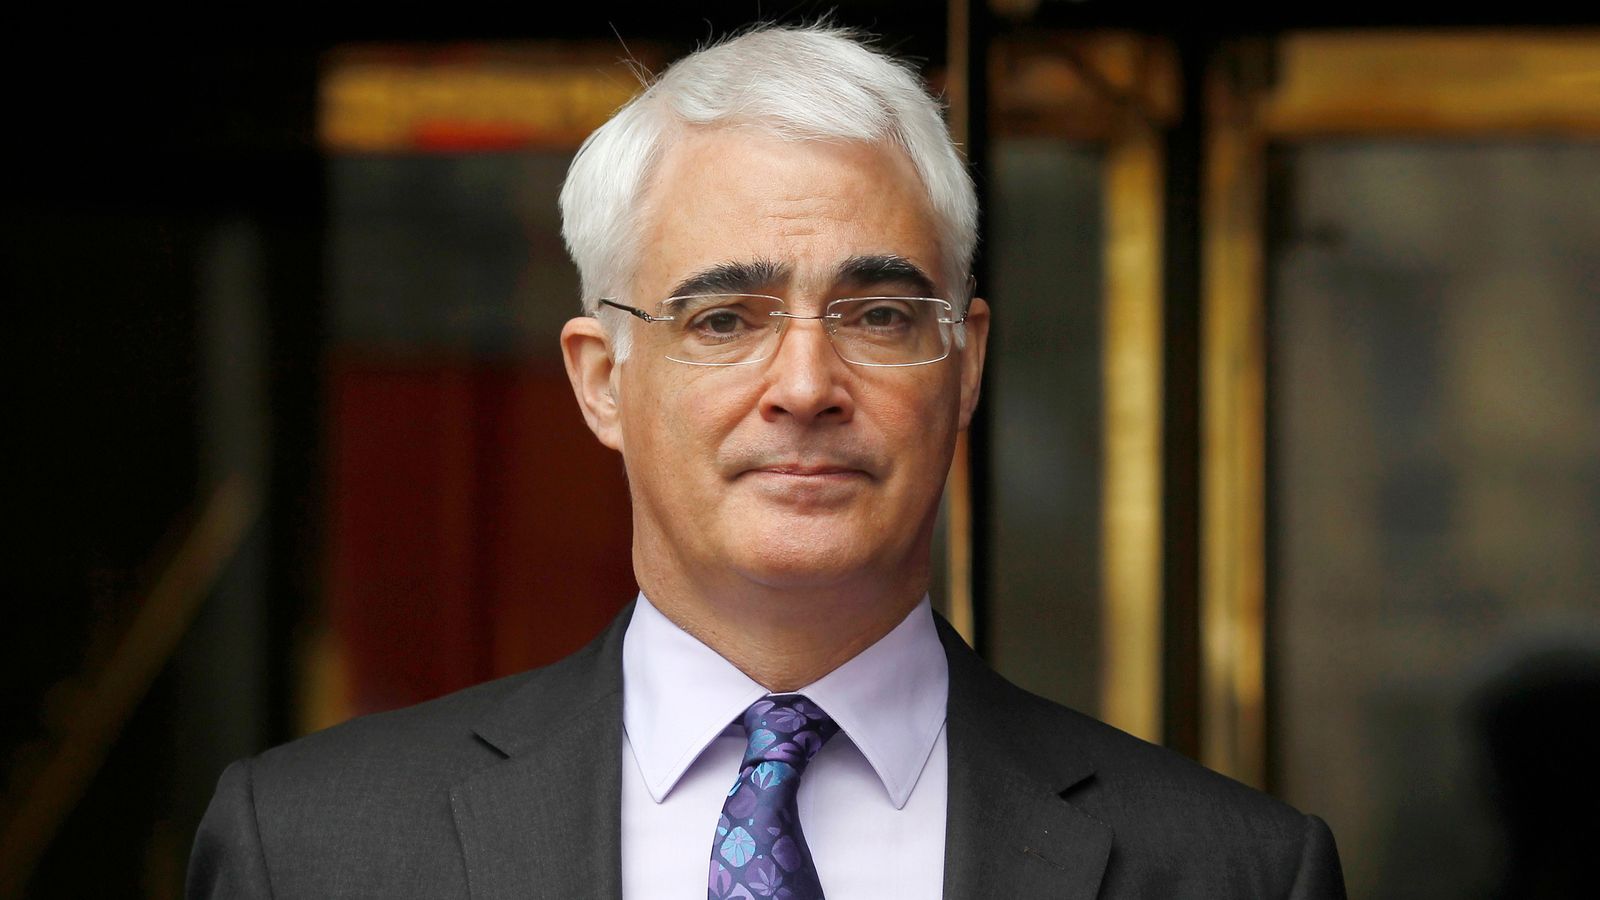 Alistair Darling: Former Labour chancellor dies aged 70